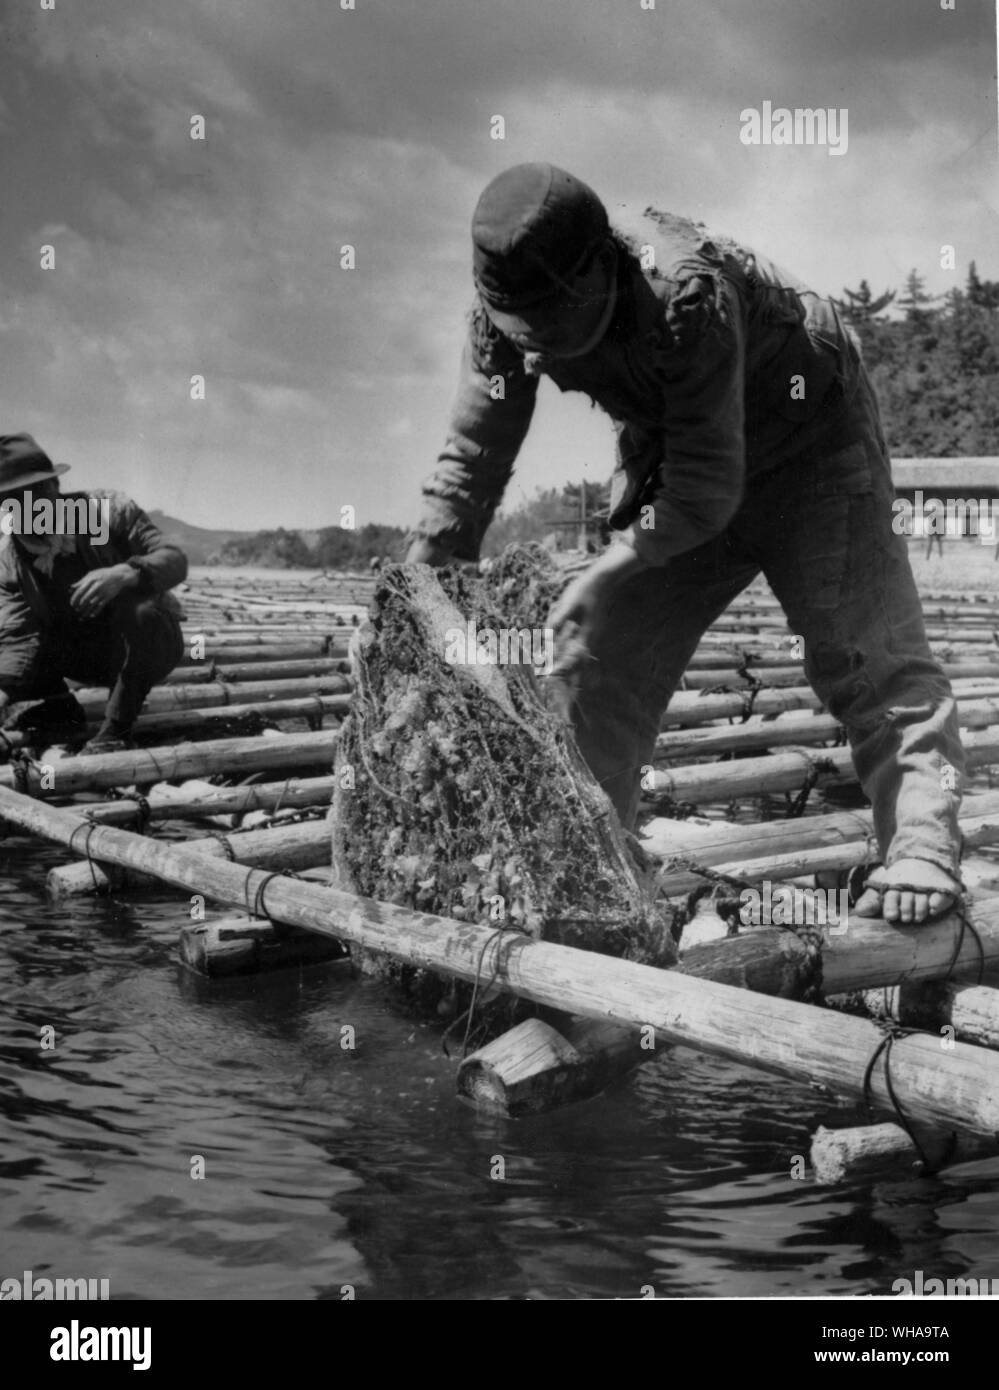 Oyster cages being drawn up for inspection. Cages are completely encrusted with all forms of sea life. These cages contain oysters which will be checked and then germ treated. Mikimoto cultured pearl farm, property of 89 Kokichi Mikimoto the Japanese pearl king.. Stock Photo